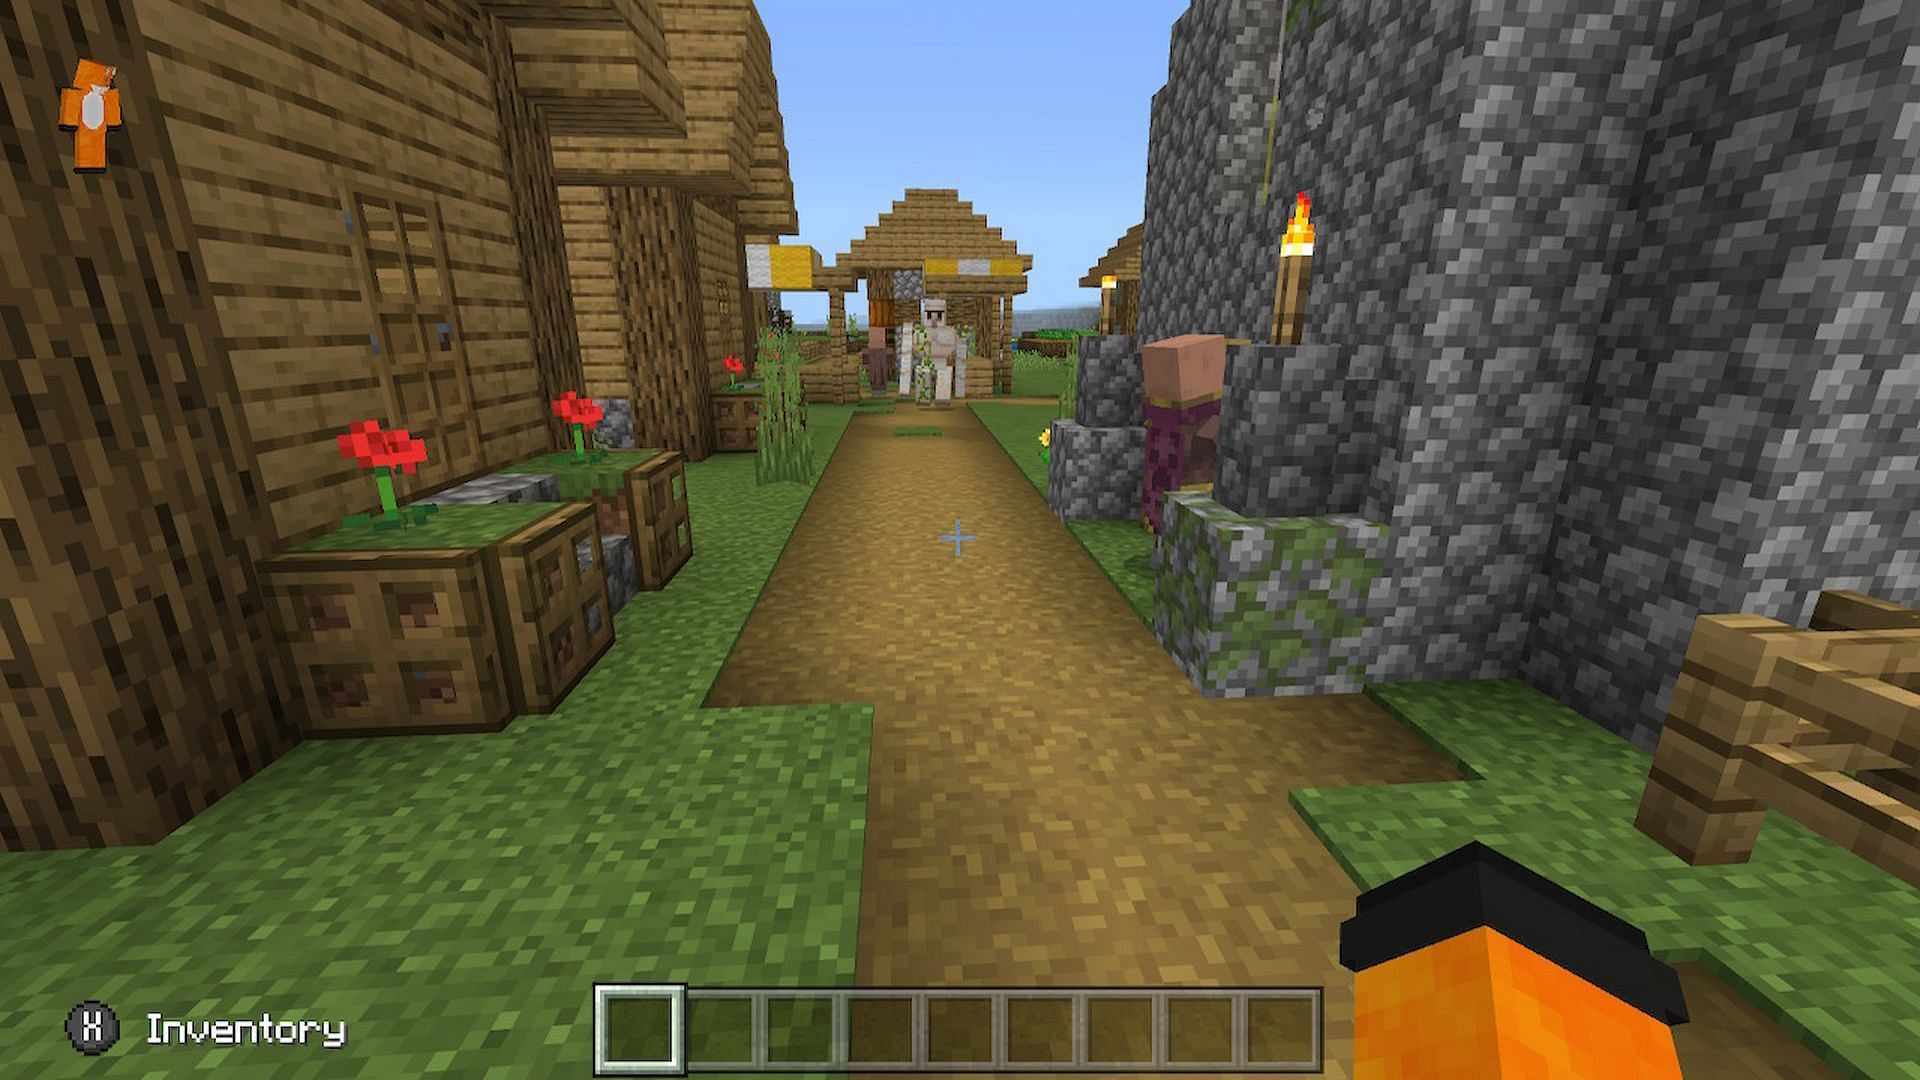 Certain seeds can help players find villages that can greatly enhance their playthrough (Image via Minecraft)